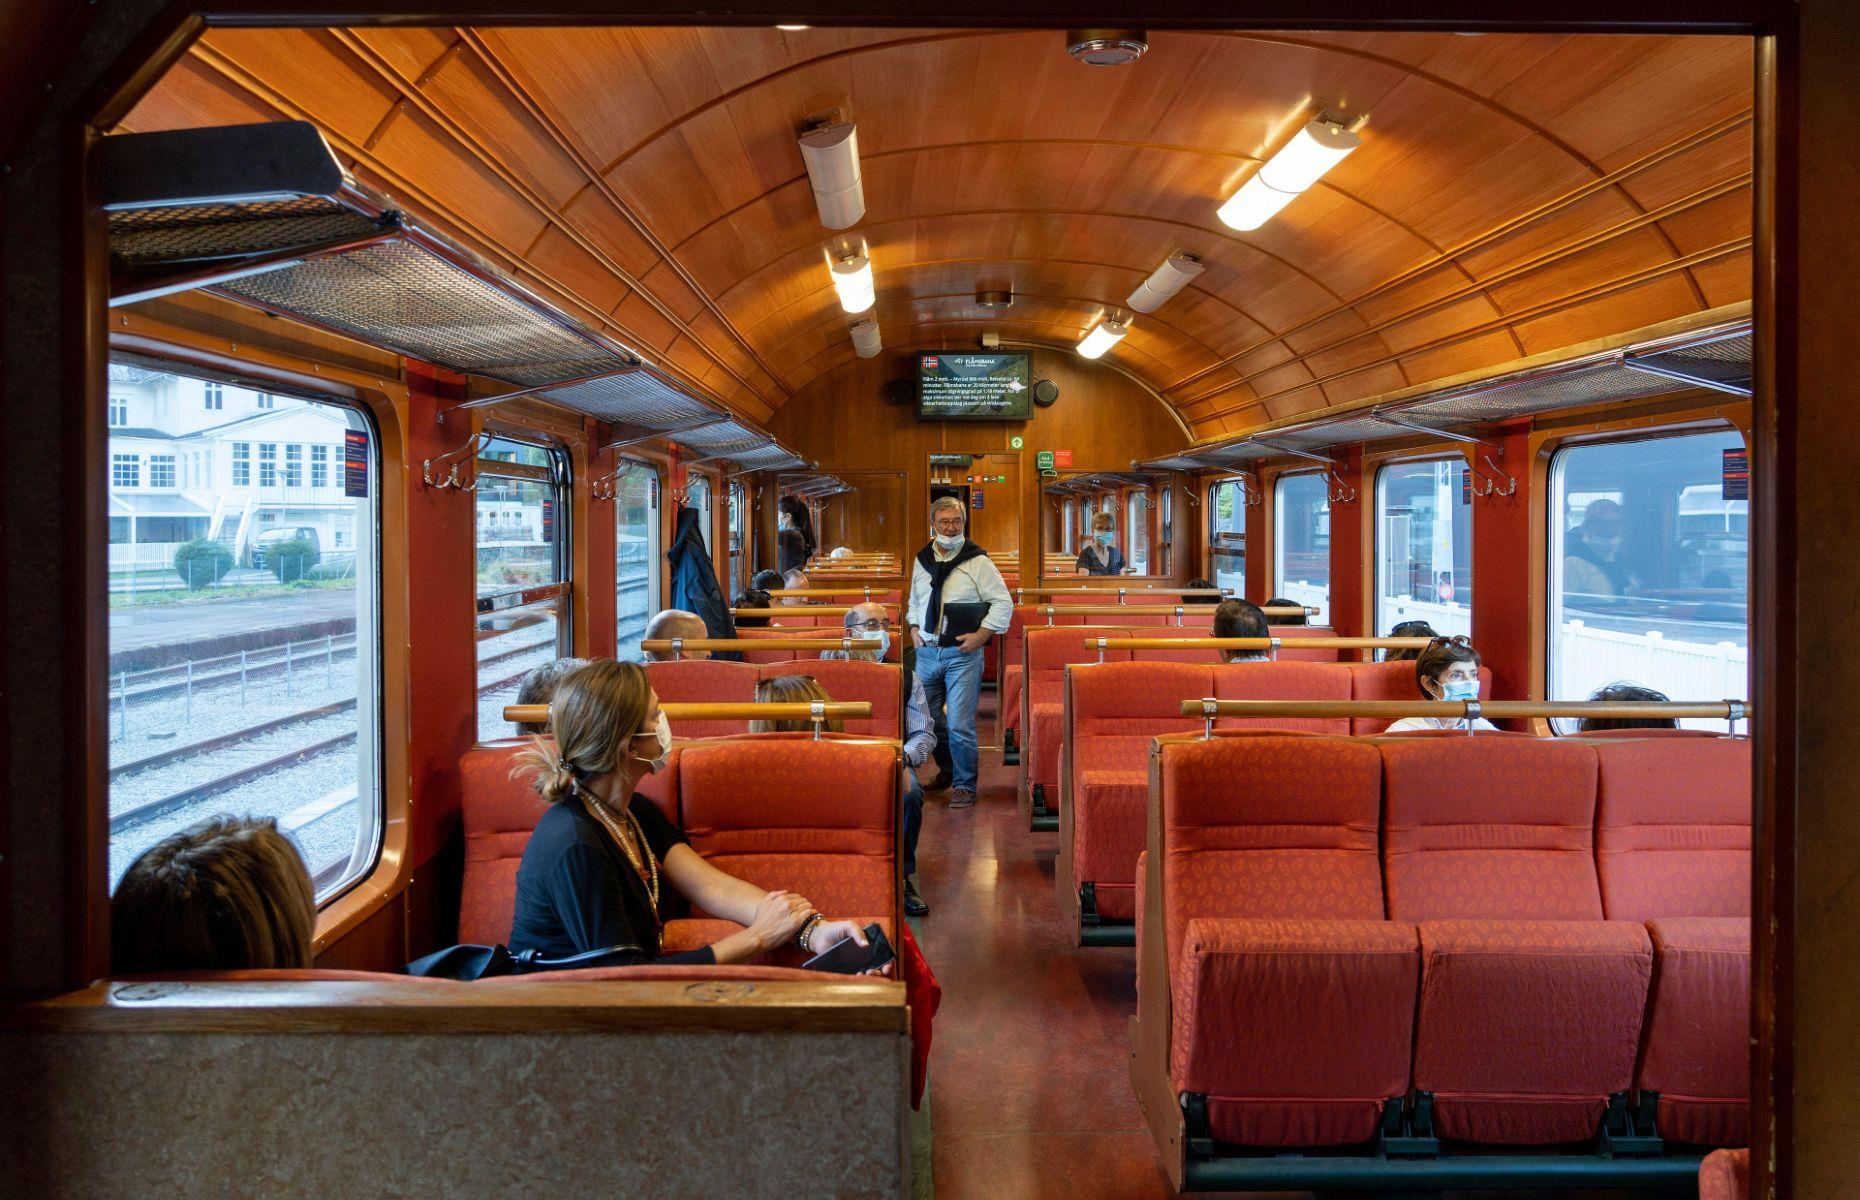 Inside, its vintage carriages are decked out with wooden furnishings and plush seats, plus there are large windows for gazing out at all the panoramic views. Tickets start at $65 for a round-trip, which takes just under an hour each way and includes a five-minute stop at the stunning Kjosfossen waterfall, where guests can get out and take pictures. The route also connects with Norway’s Bergen Line between Bergen and Oslo, so you can combine two ultra-pretty journeys.